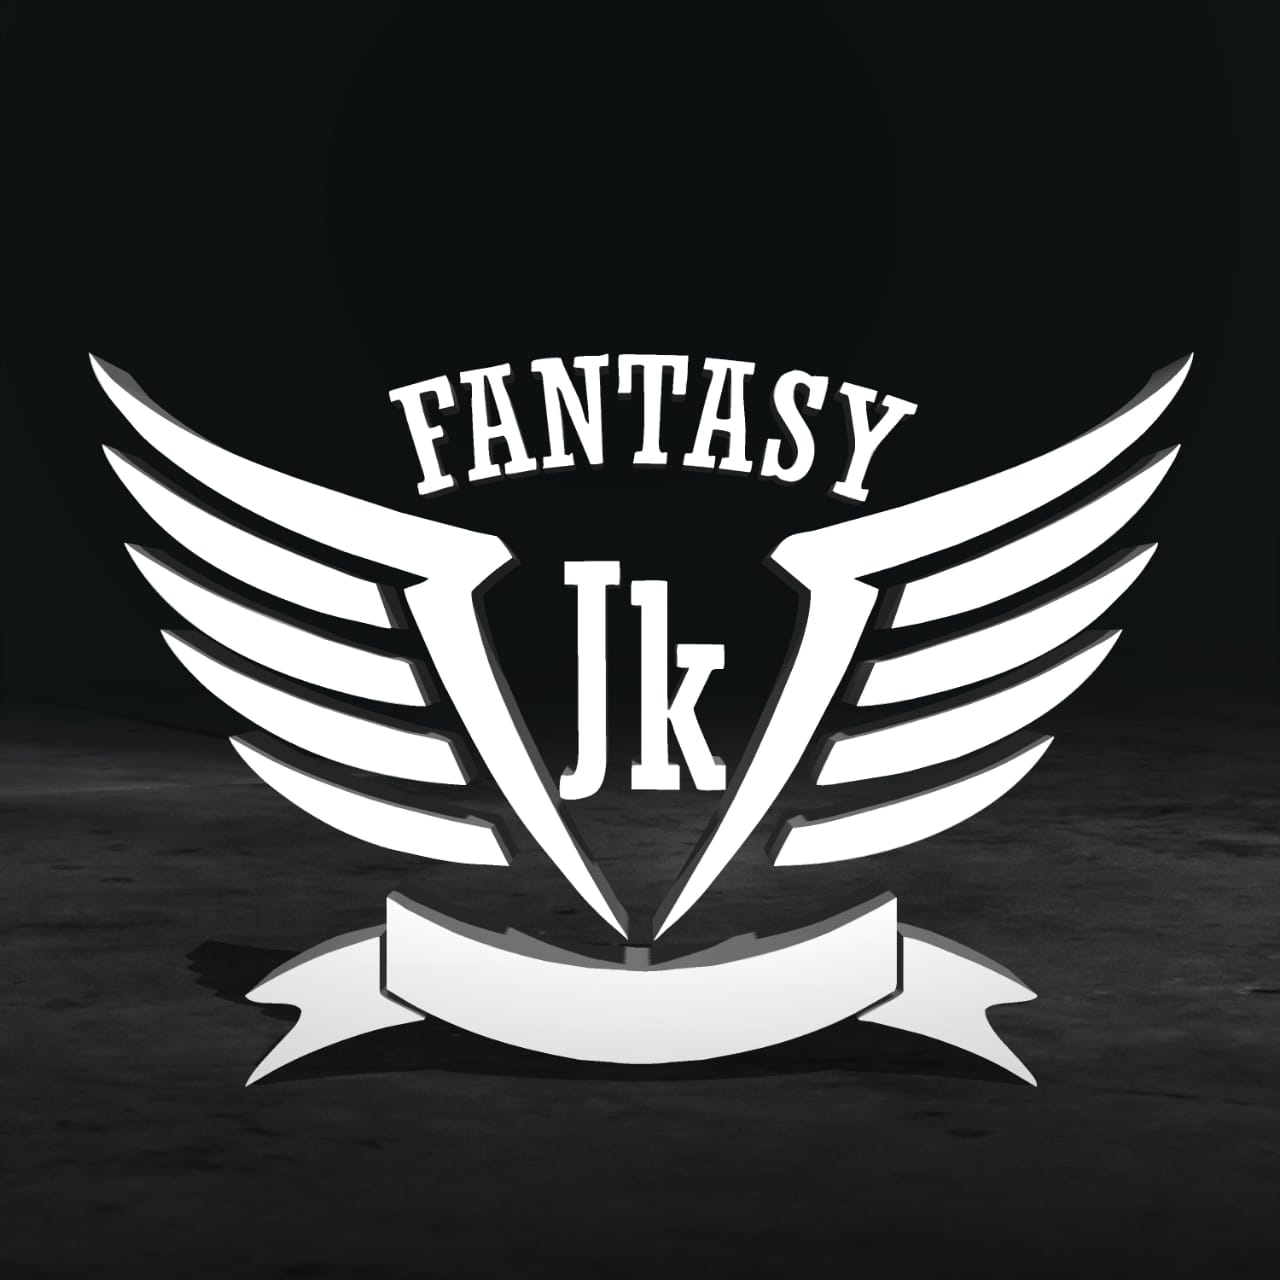 Fantasy JK is propelling the fantasy sports industry with its proficiency in sports